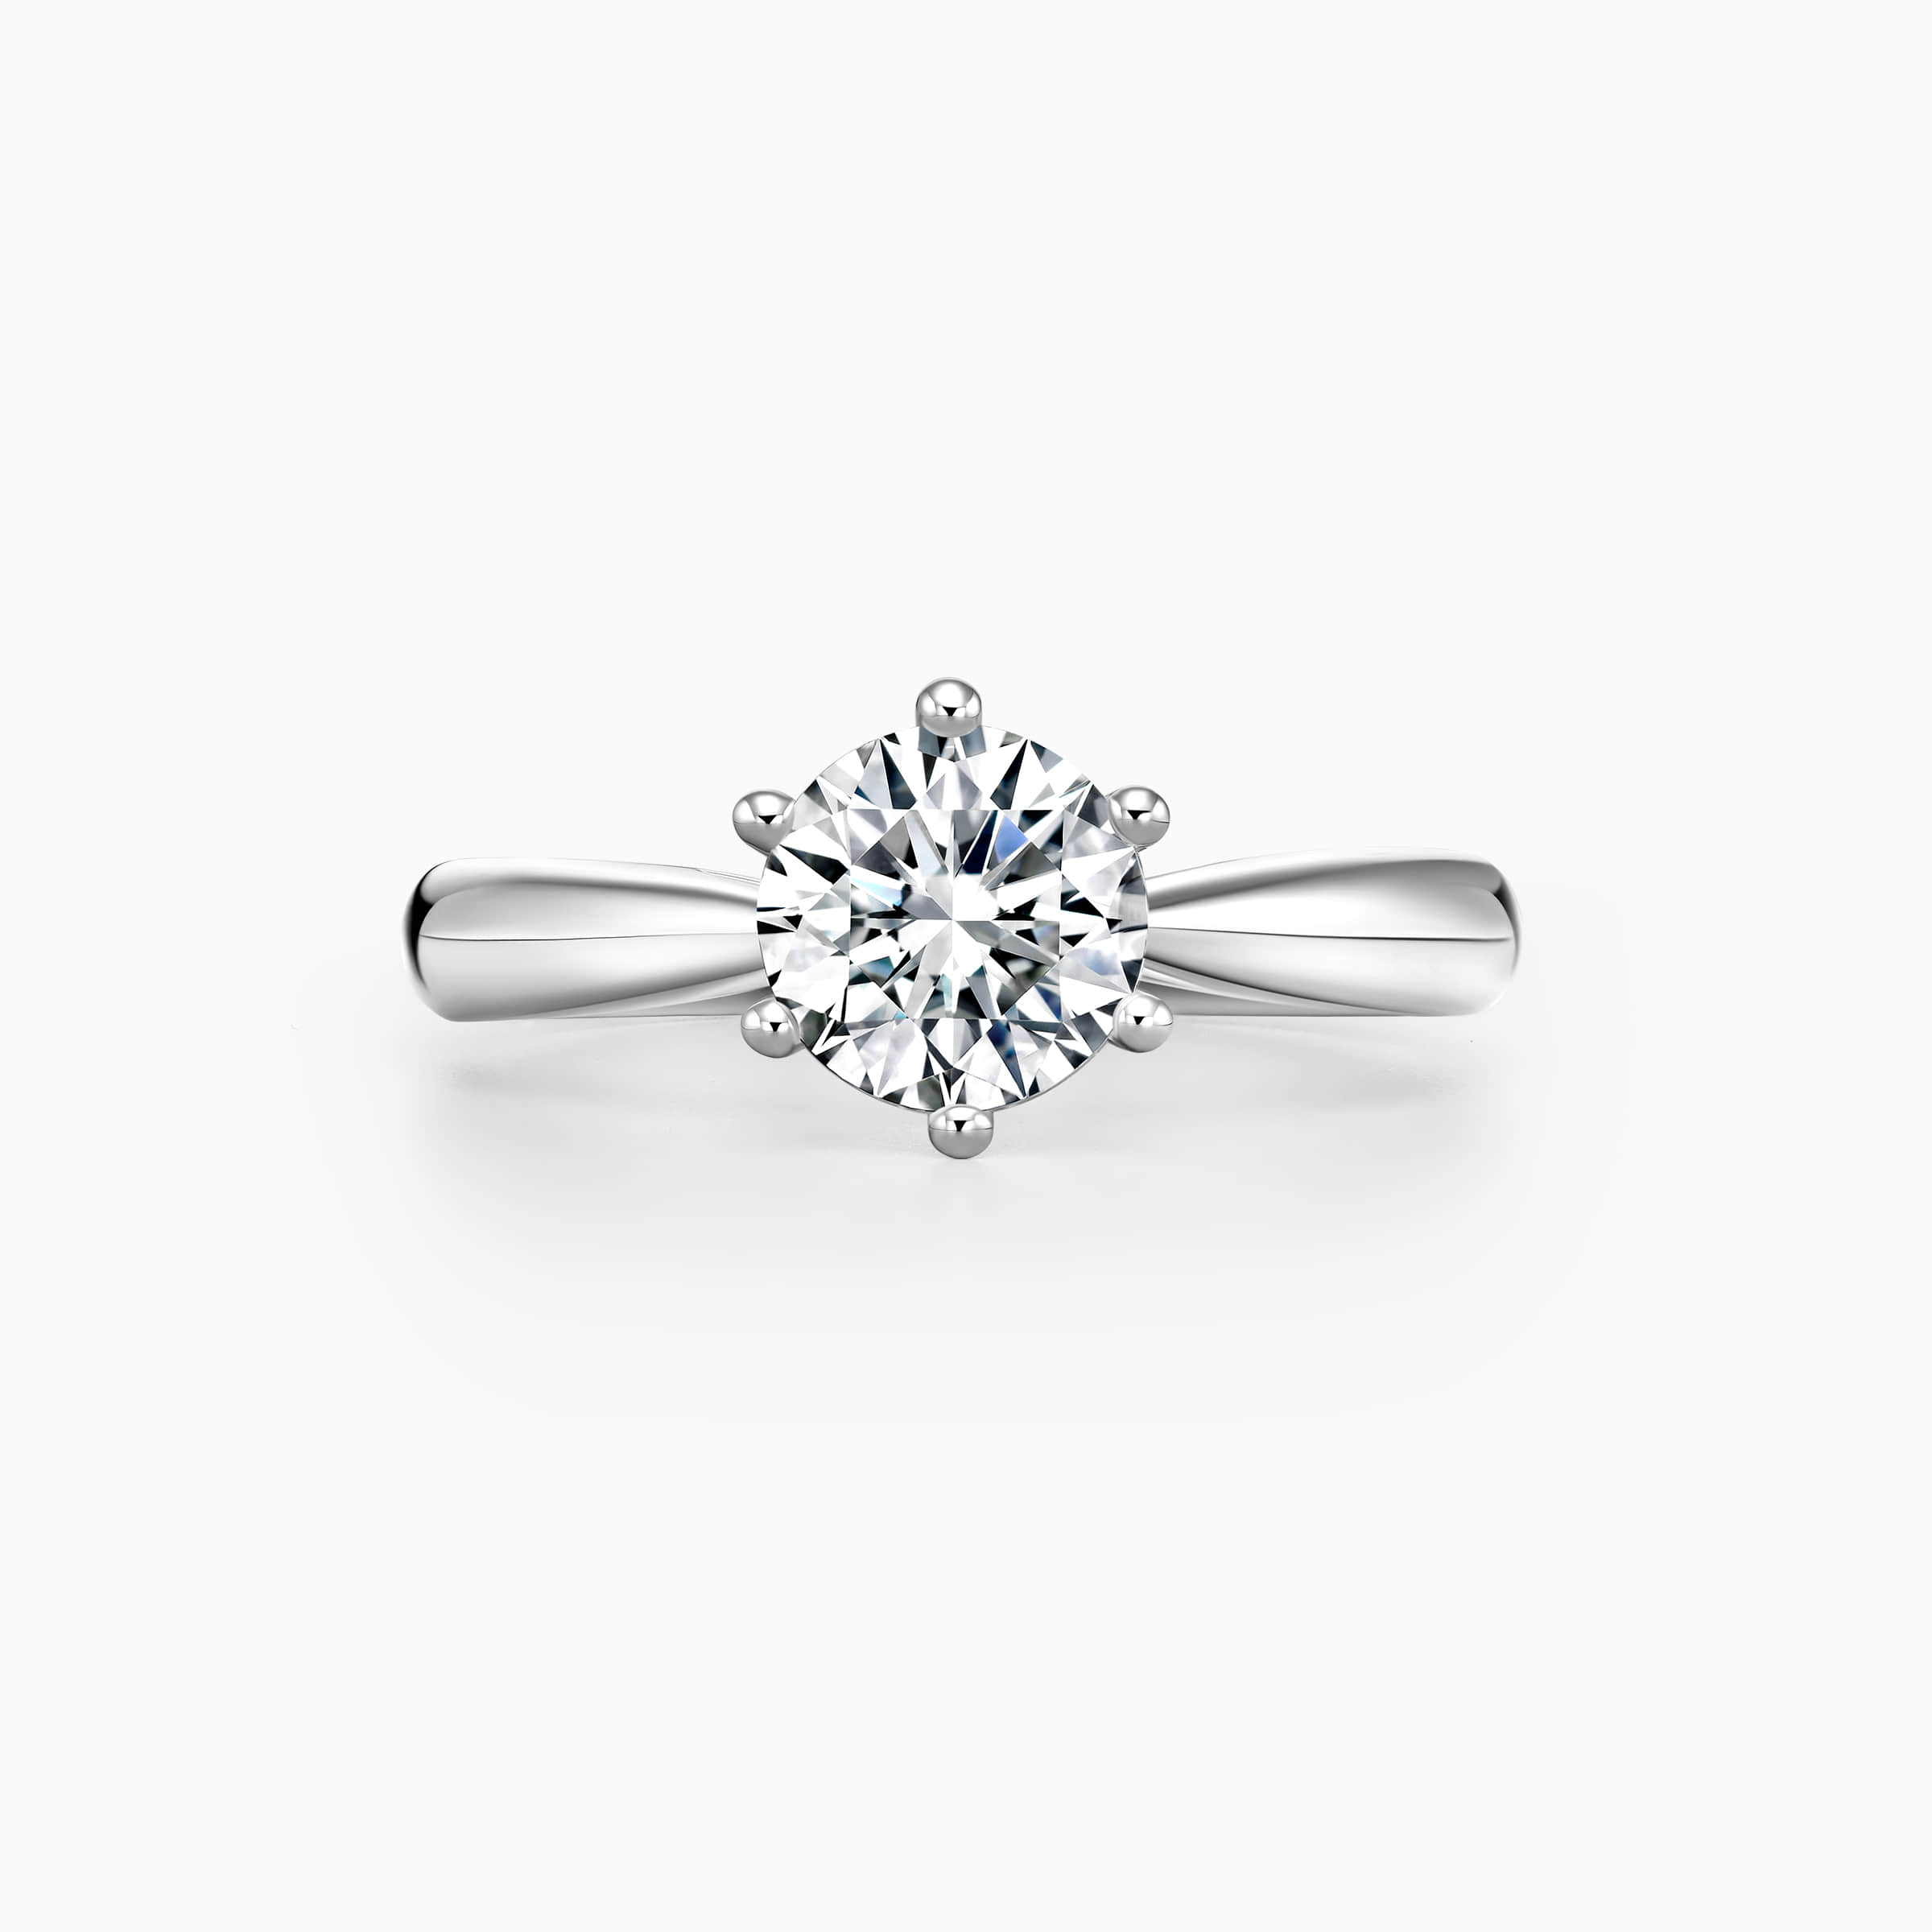 Darry Ring hexagon promise ring top view